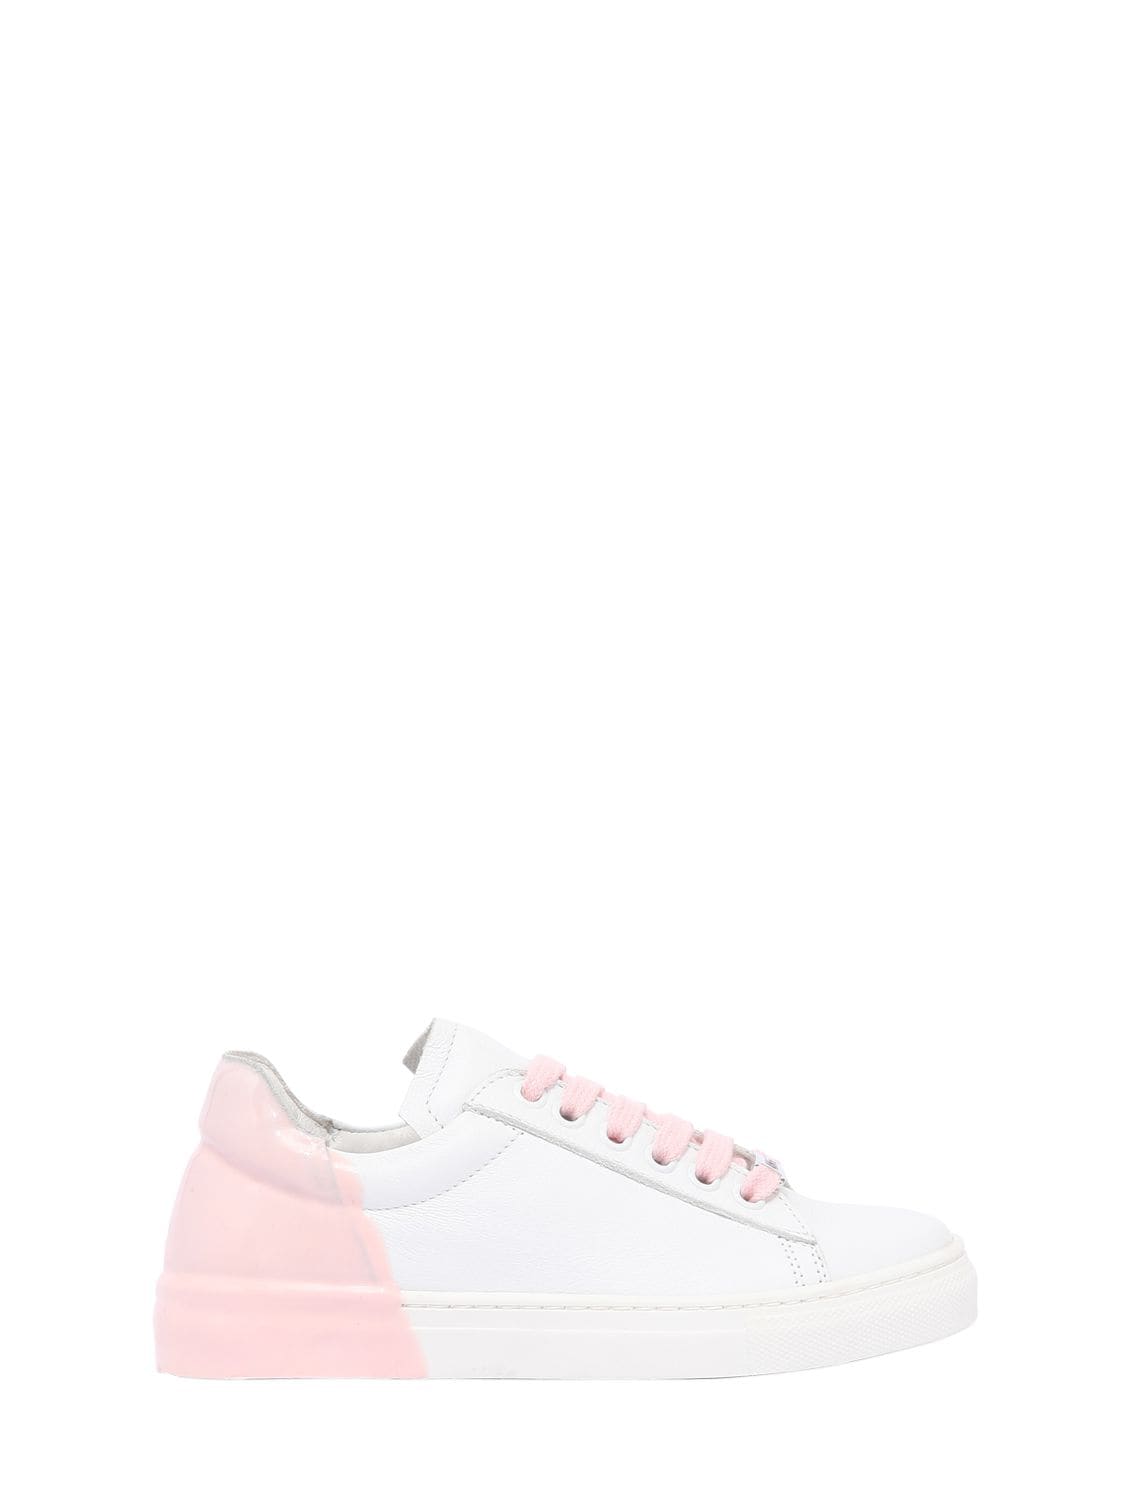 Am 66 Kids' Rubber Heel Two Tone Leather Sneakers In White,pink